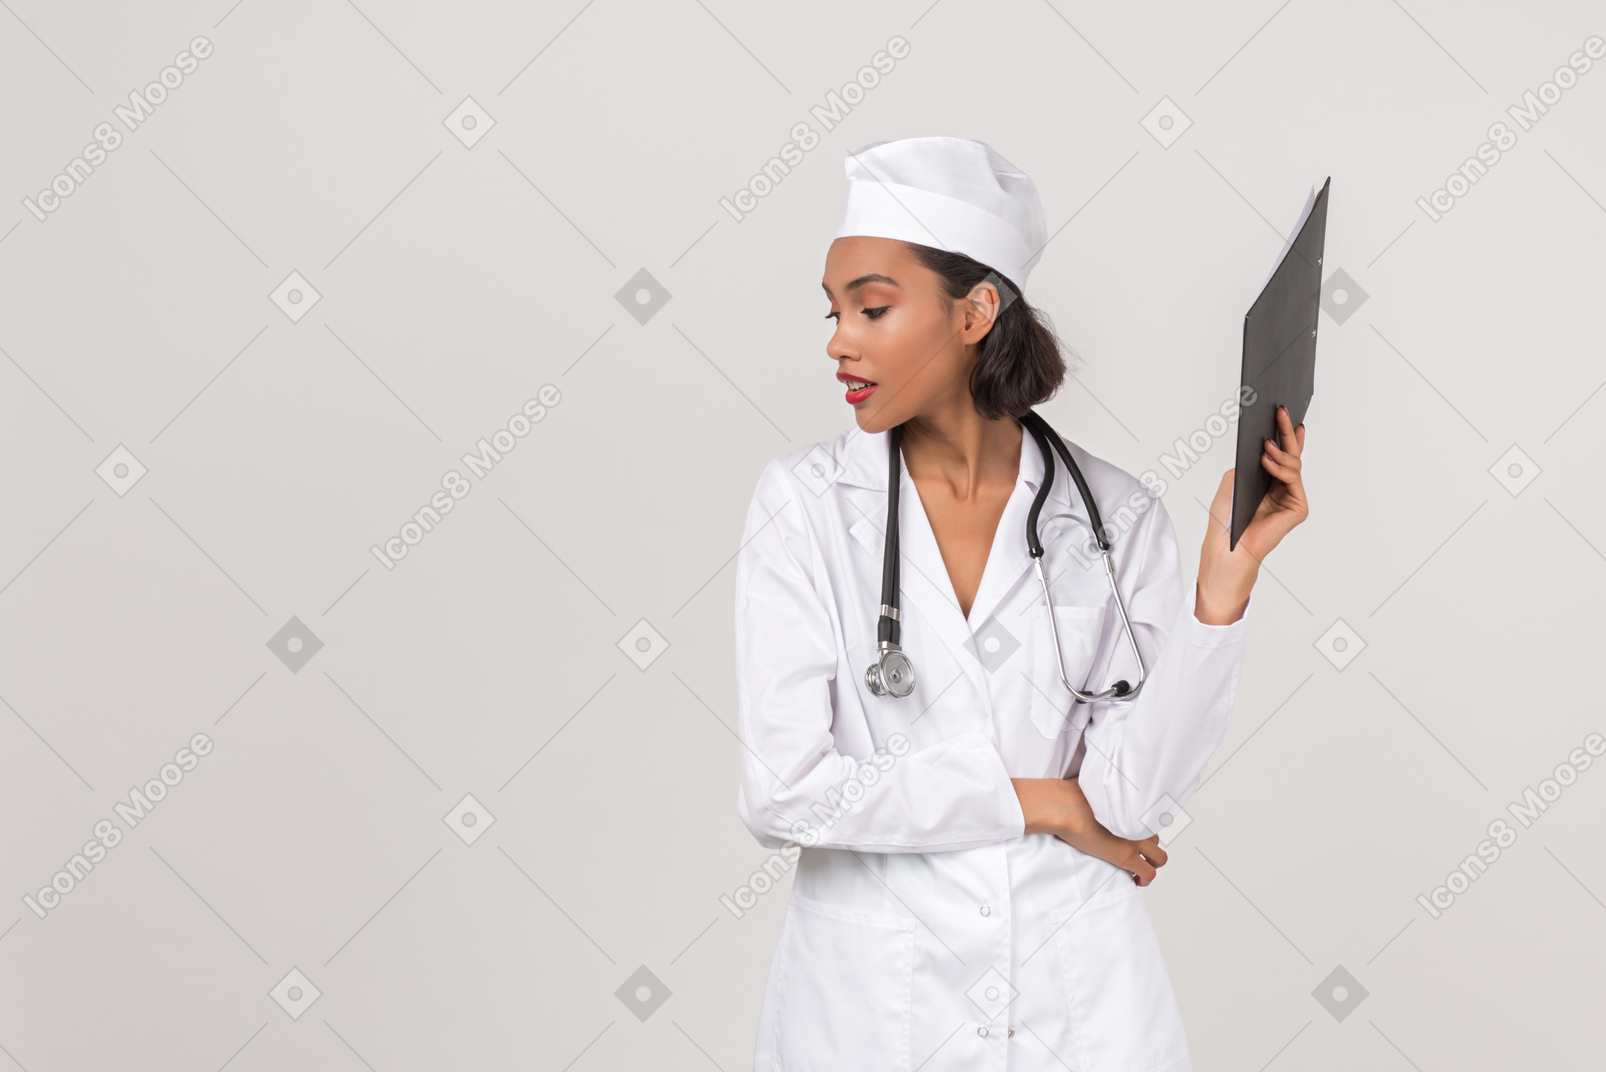 Attracive female doctor holding a chart holder